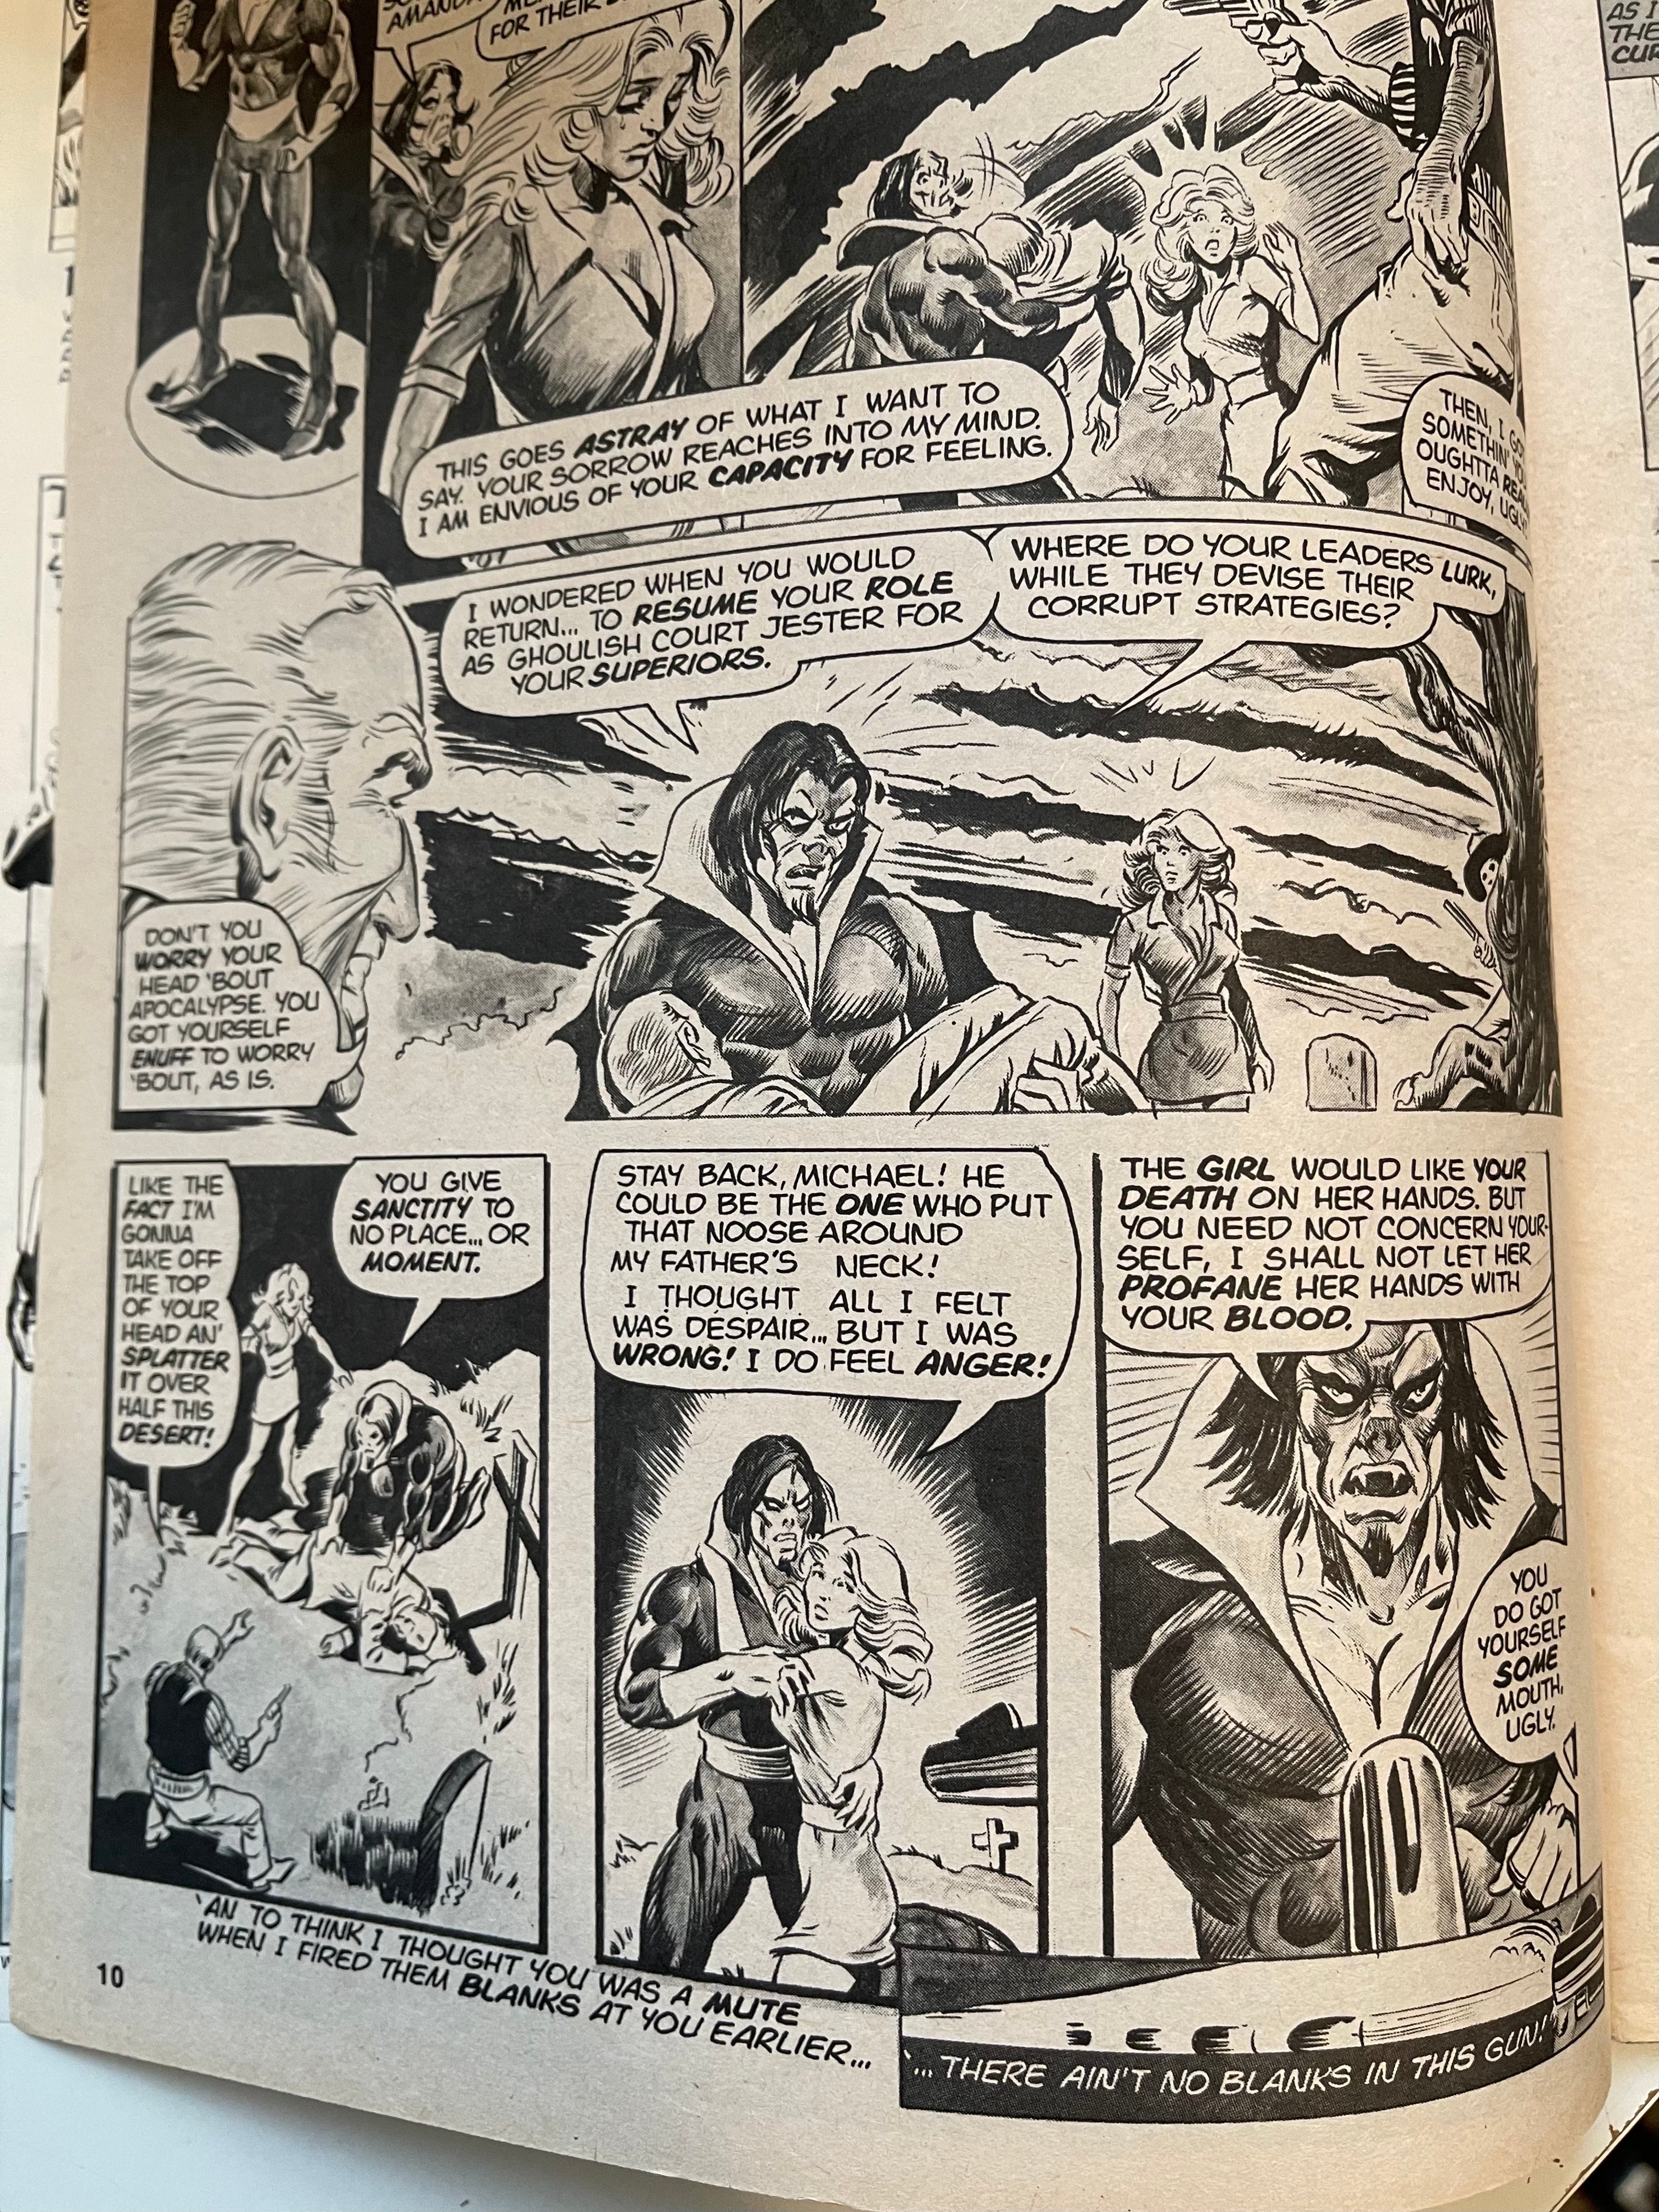 Vampire Tales #8 first Solo Blade story comic magazine 1974